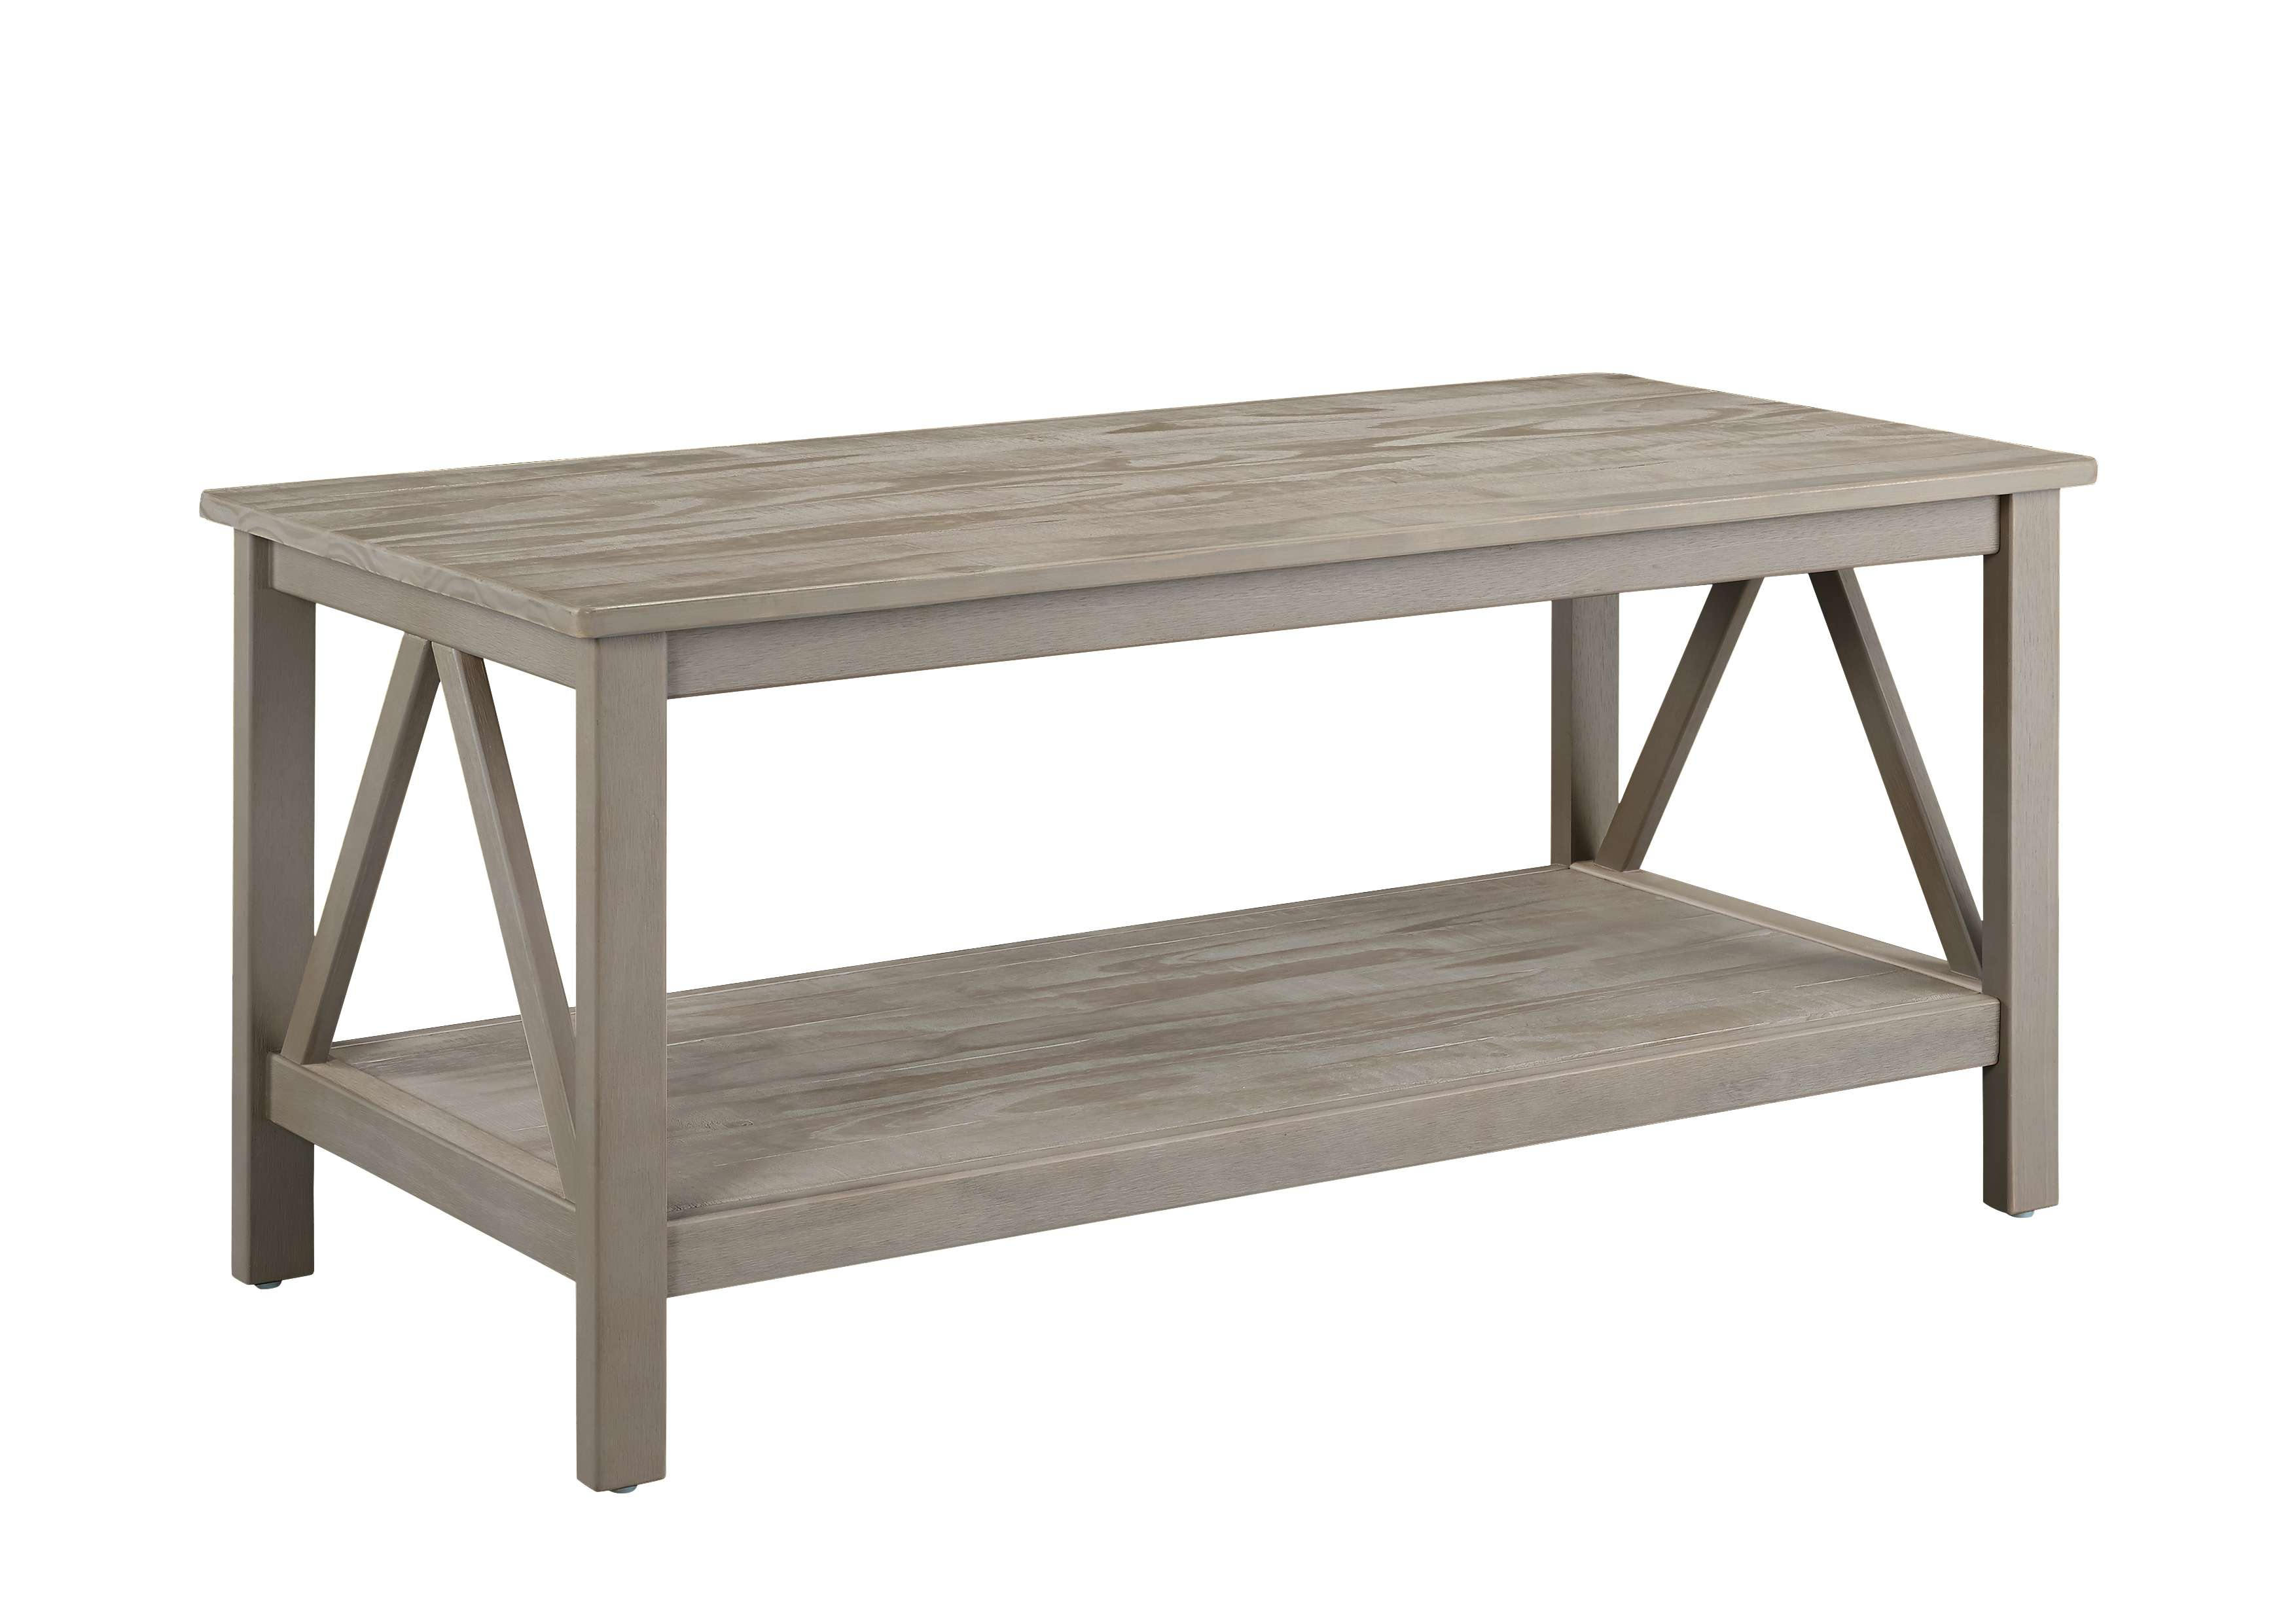 Linon Home Decor Products Inc Titian Rustic Gray Coffee Table intended for proportions 3508 X 2480